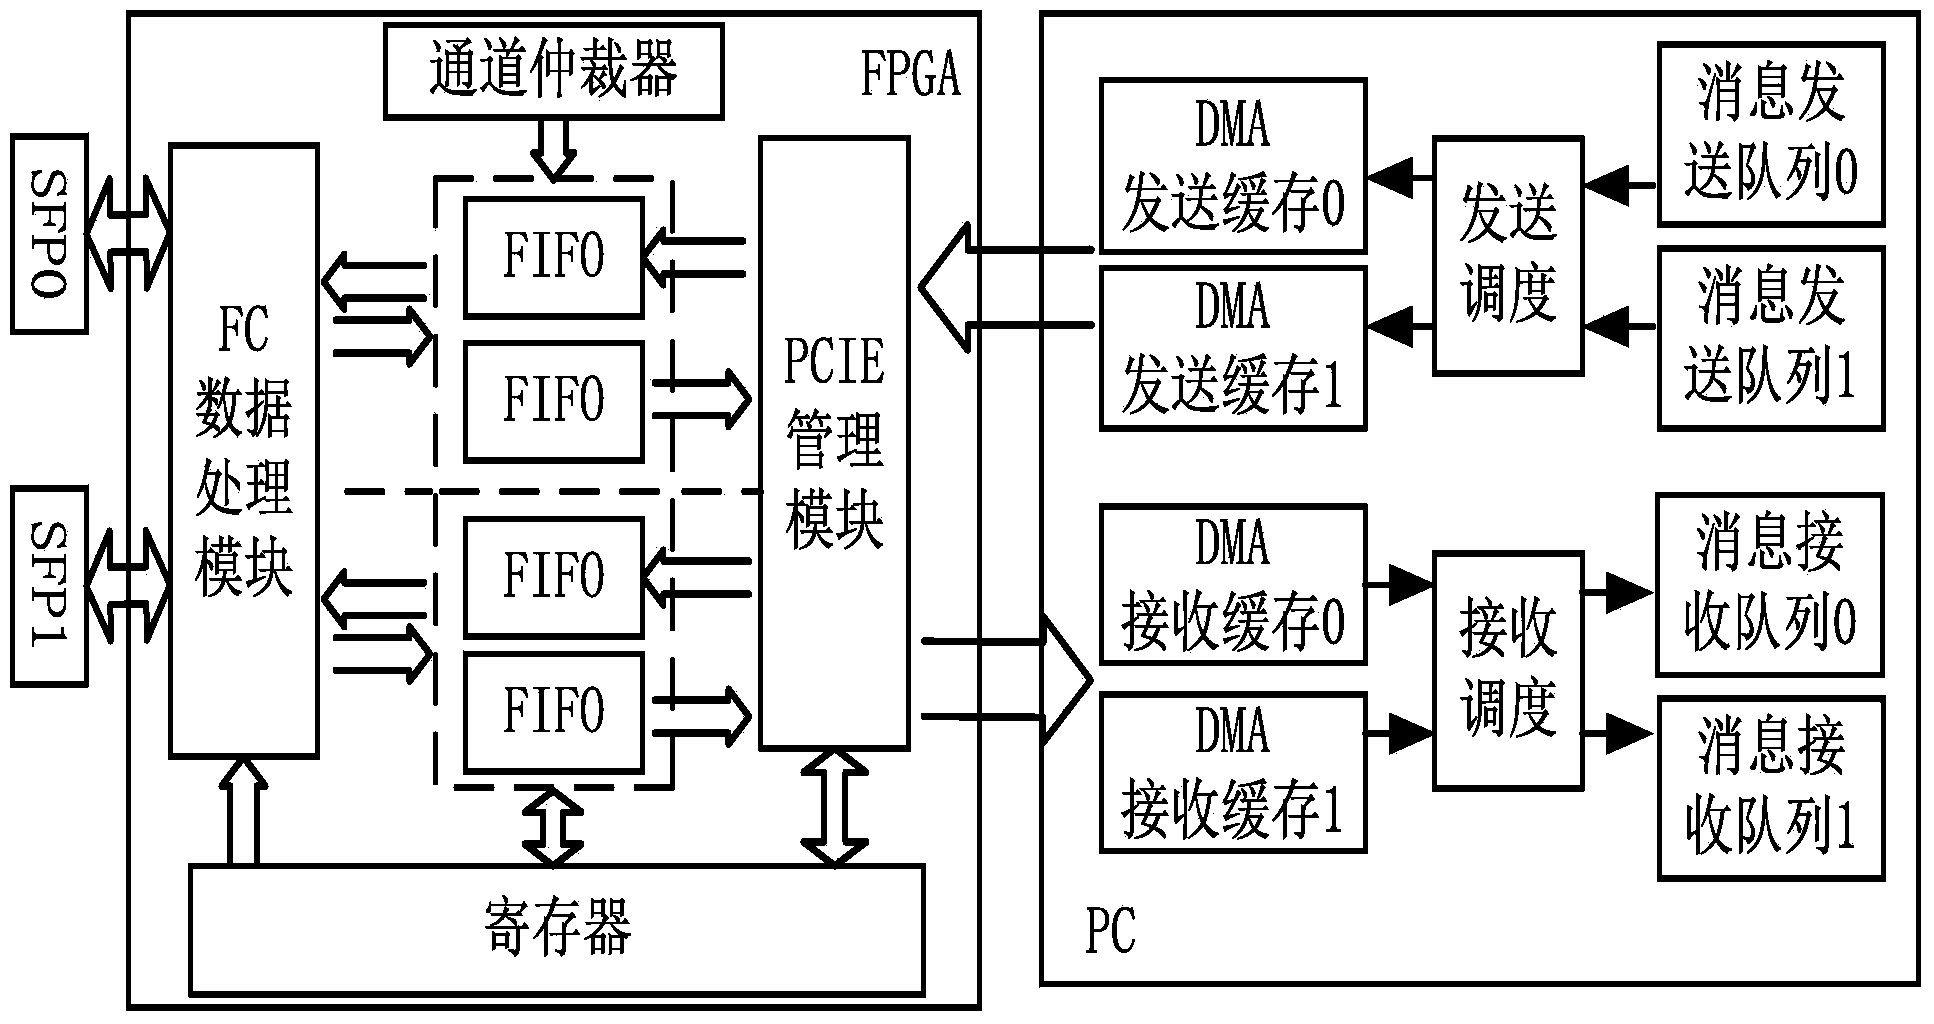 Data channel scheduling method of multichannel FC network data simulation system